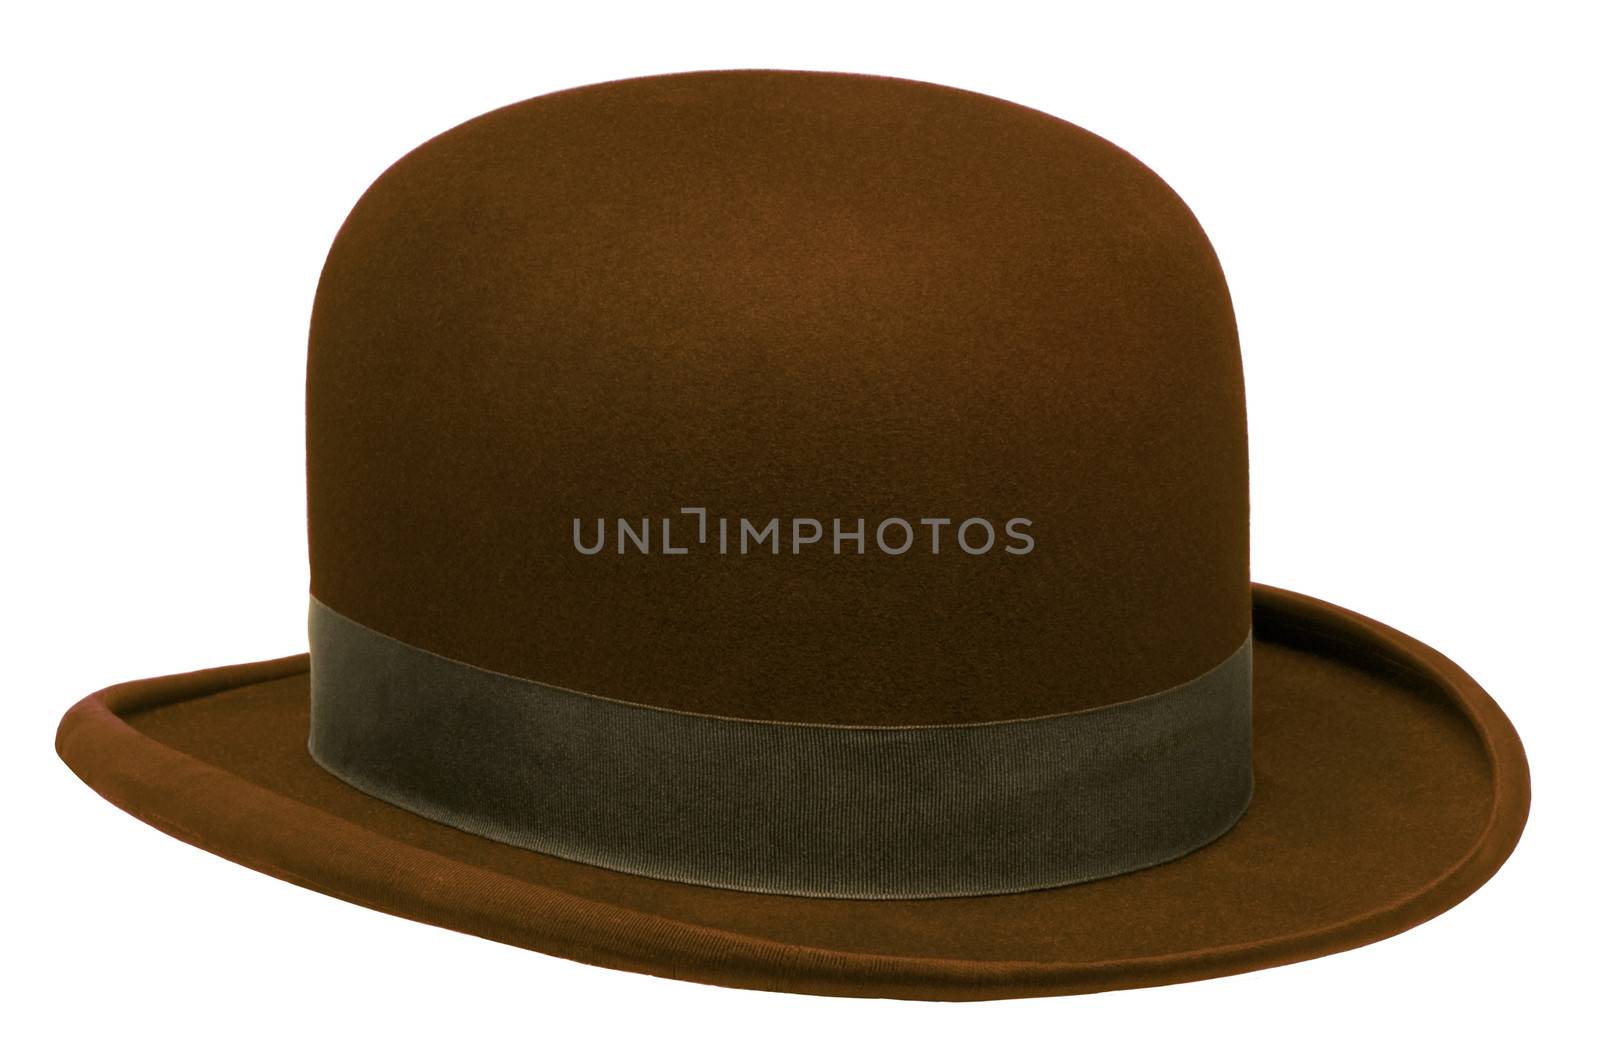 Brown bowler or derby hat isolated against white background